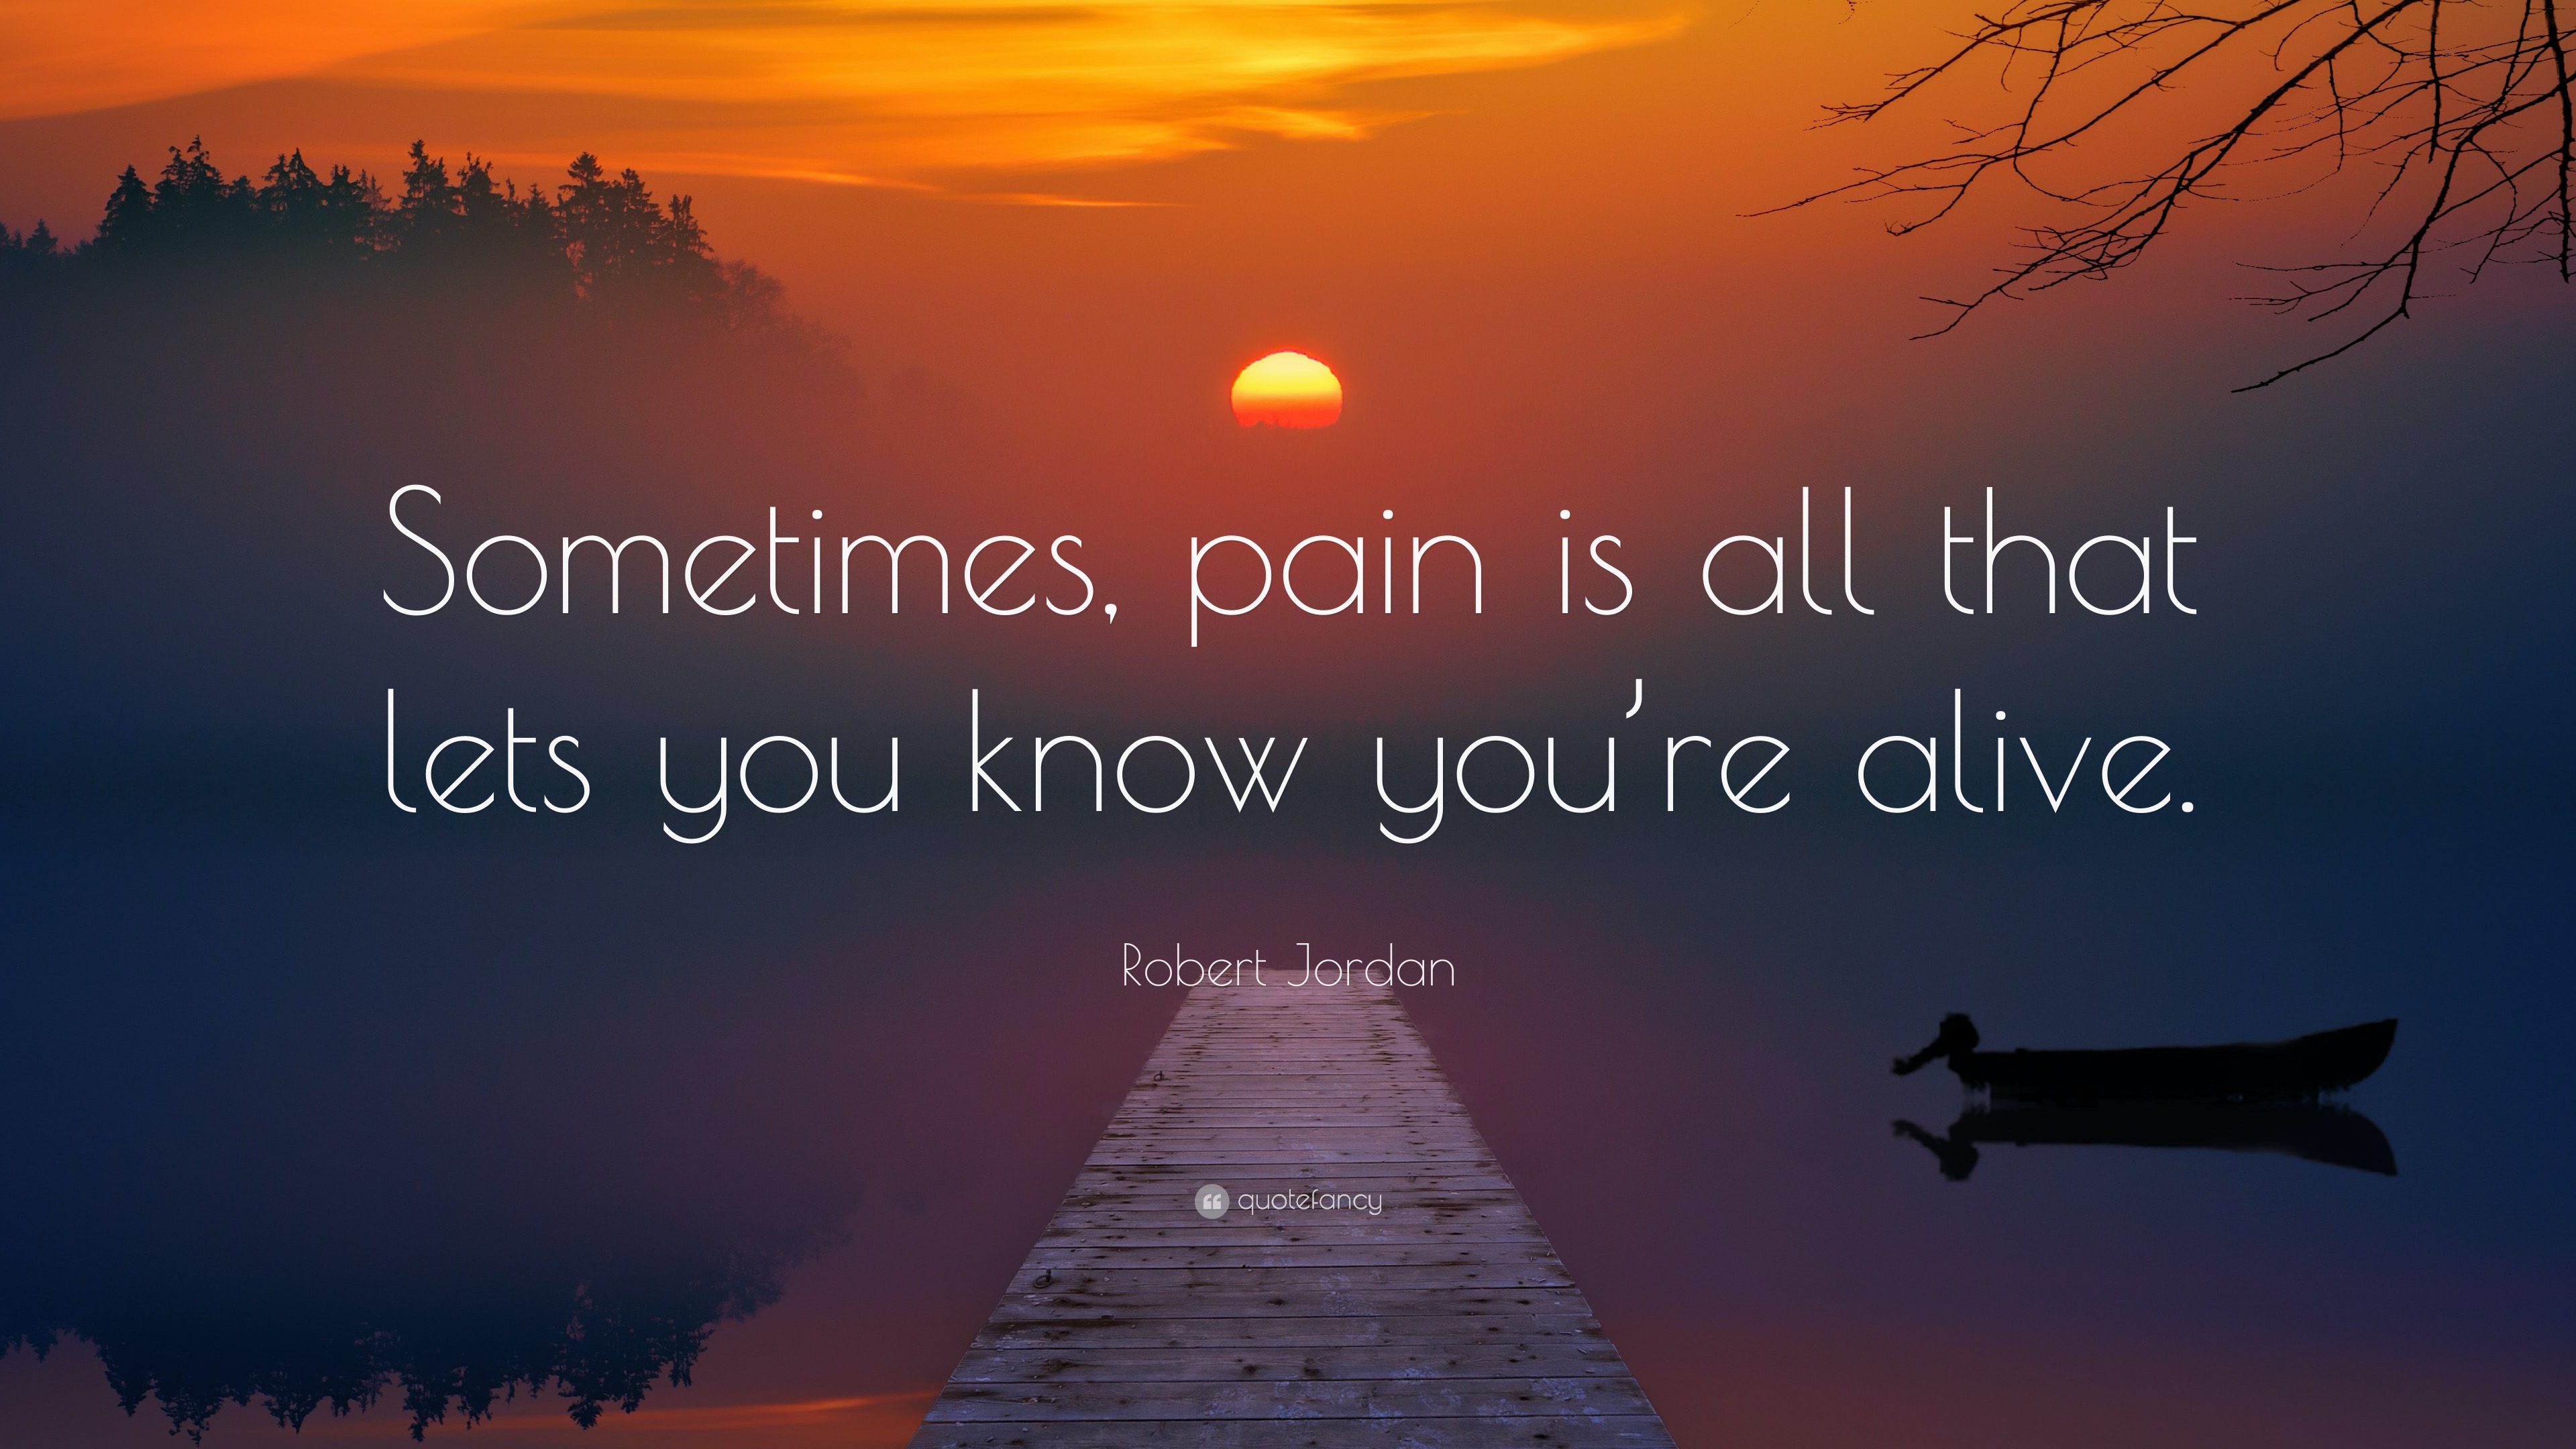 Robert Jordan Quote: “Sometimes, pain is all that lets you know you’re ...